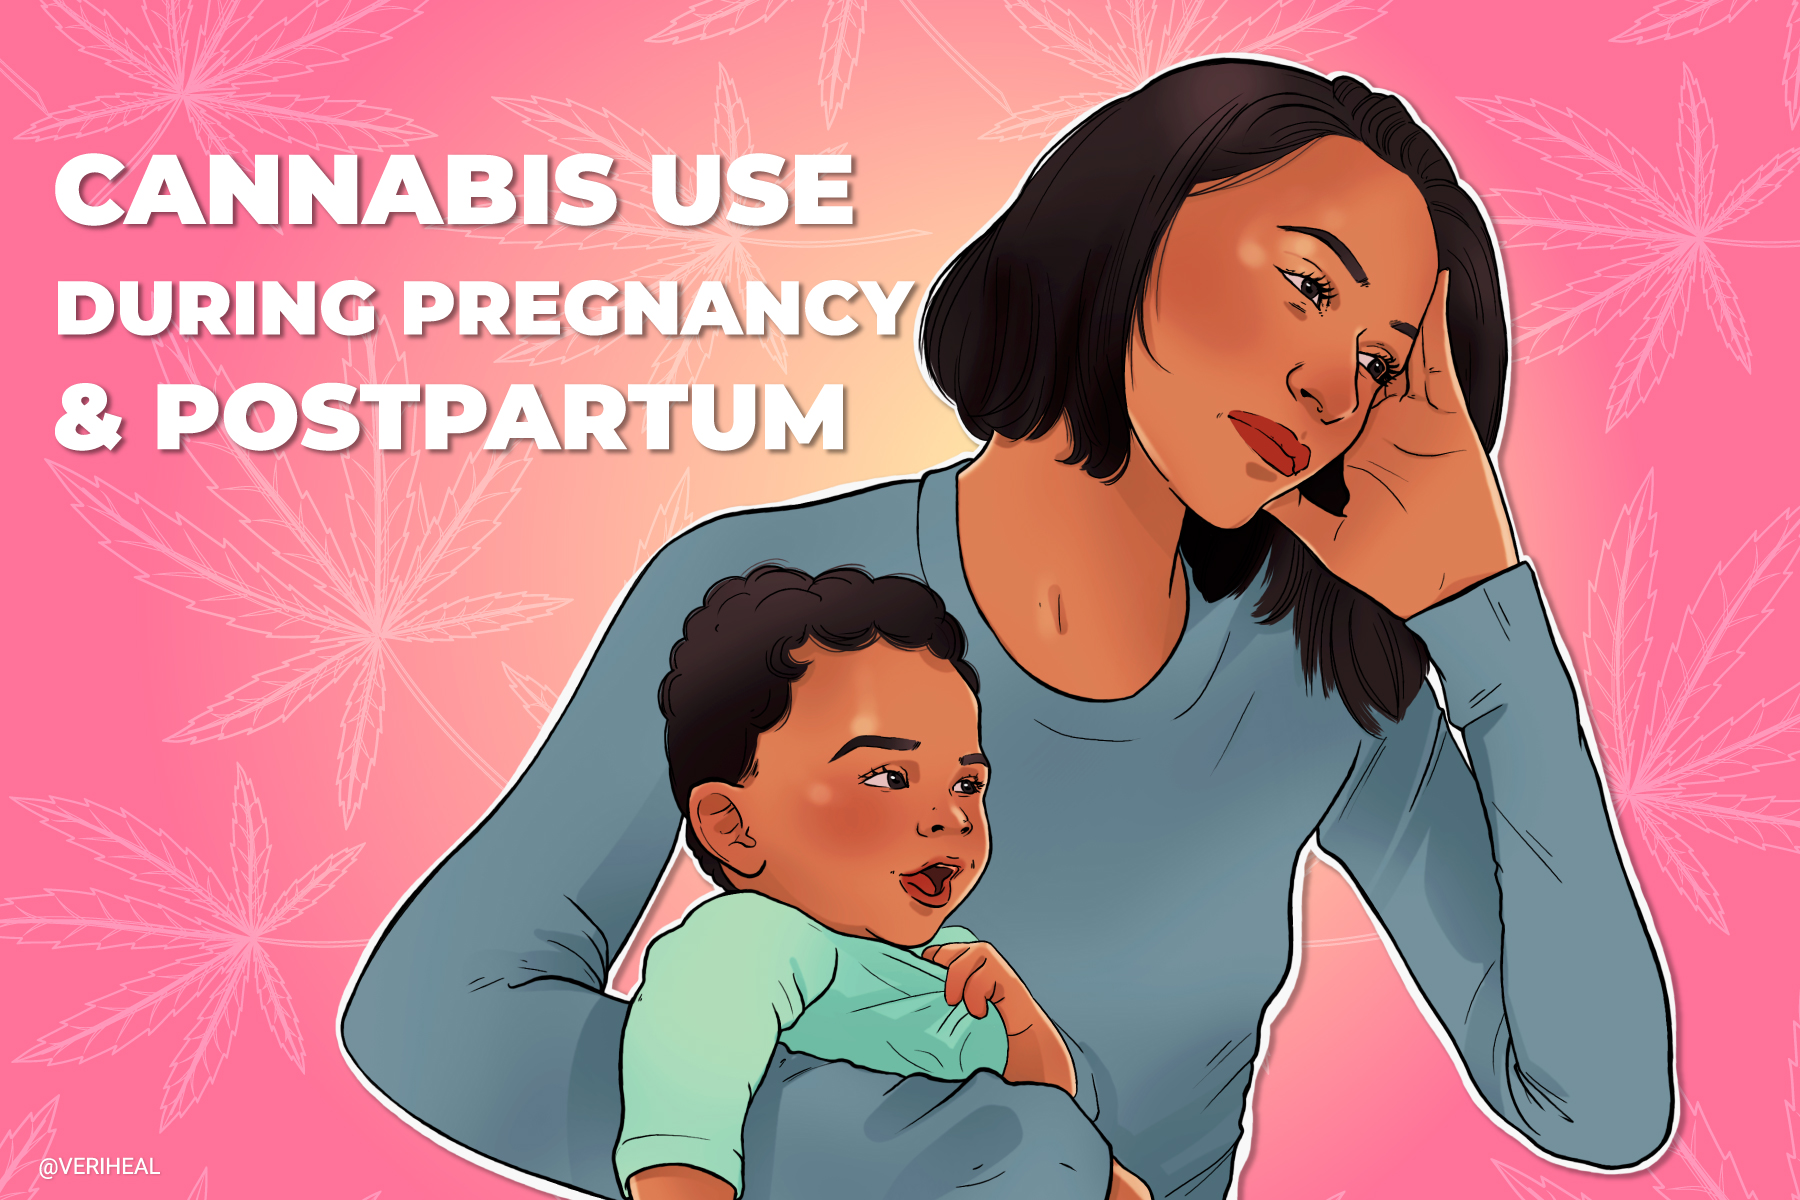 Researchers Study Effects of Cannabis Use During Pregnancy and Postpartum